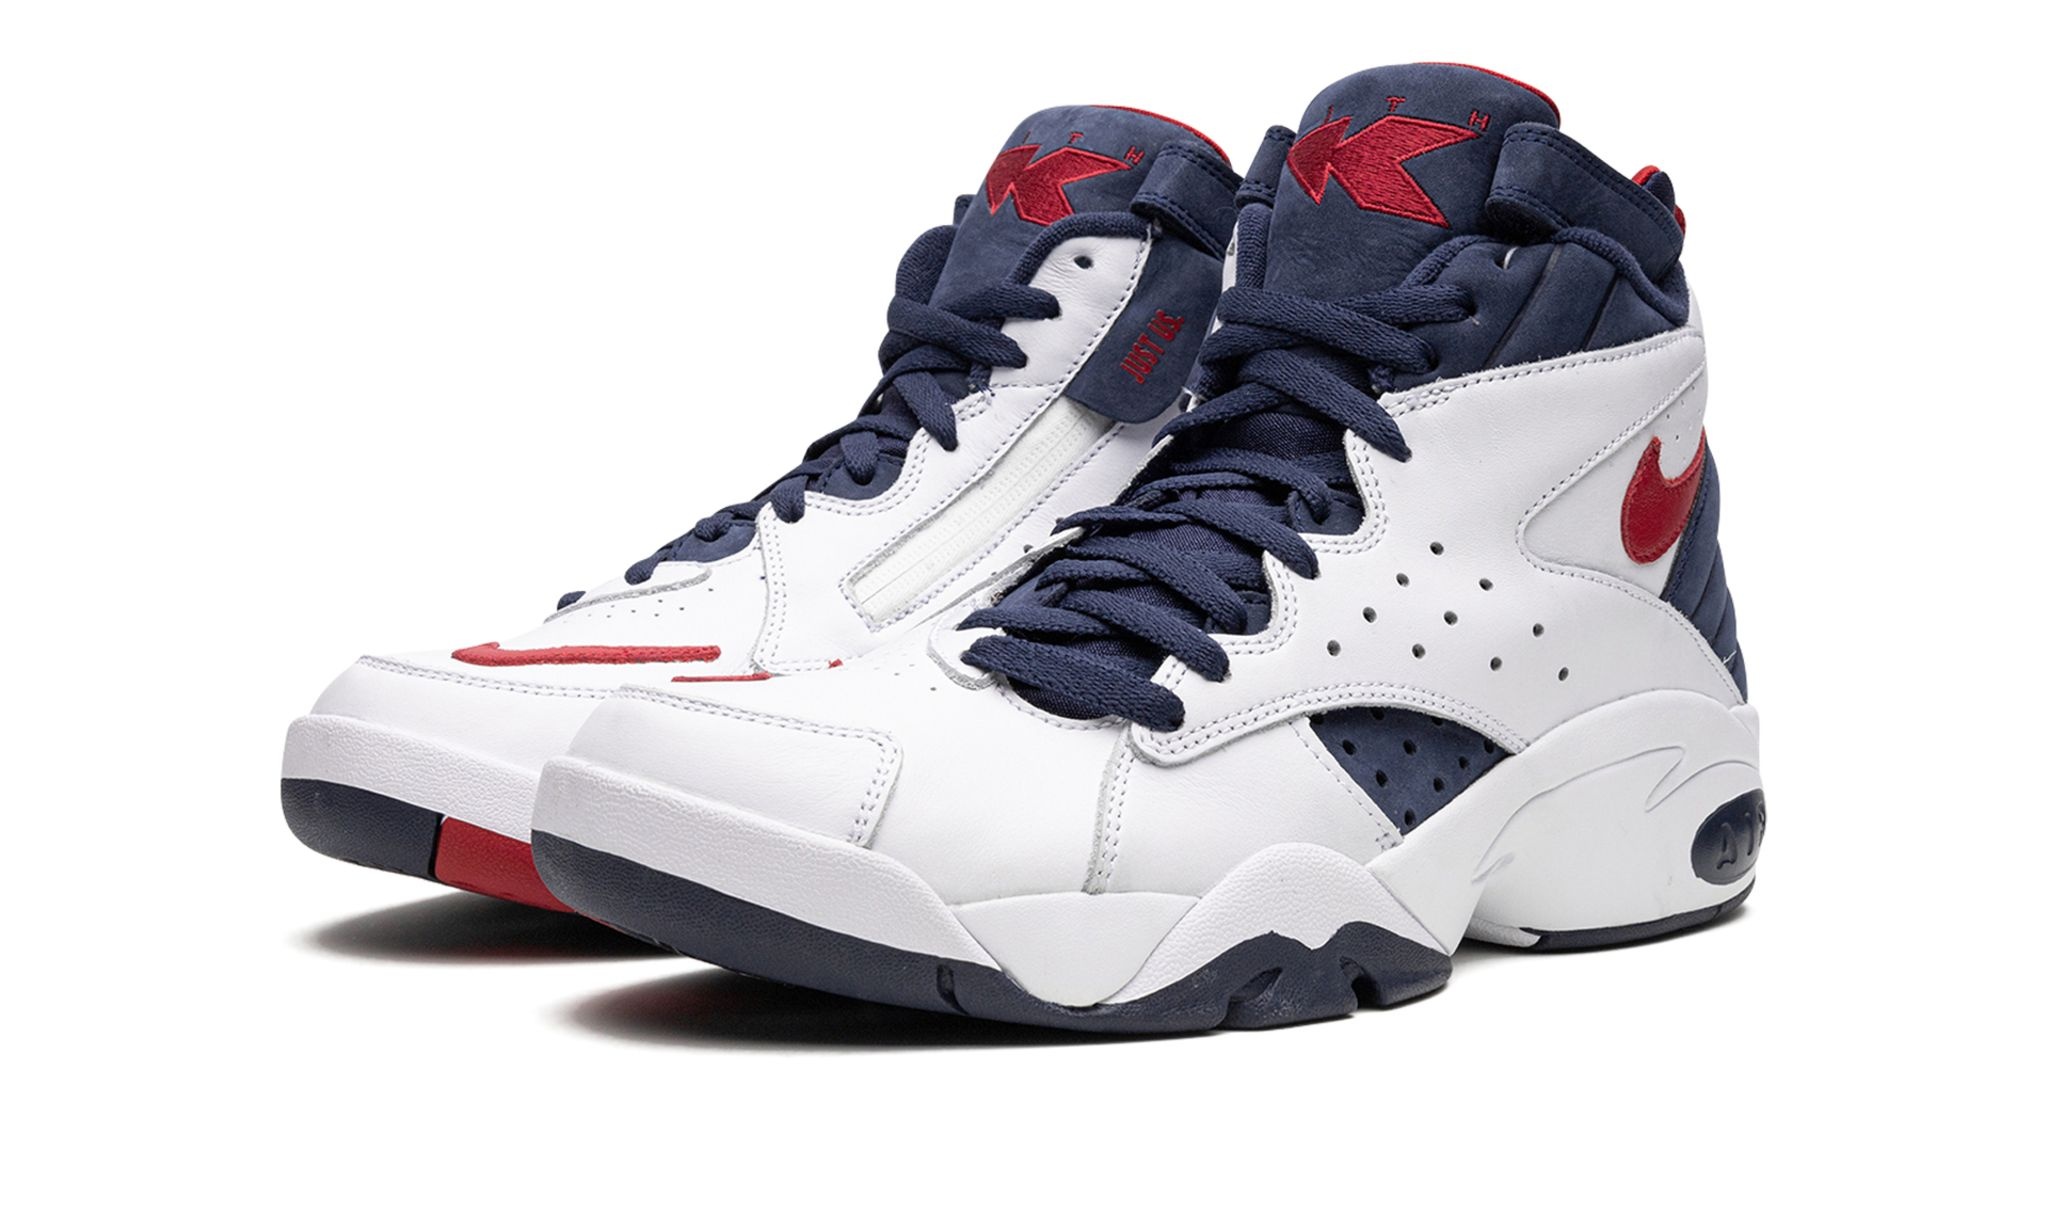 Air Maestro 2 High "Kith - USA - Friends and Family" - 2